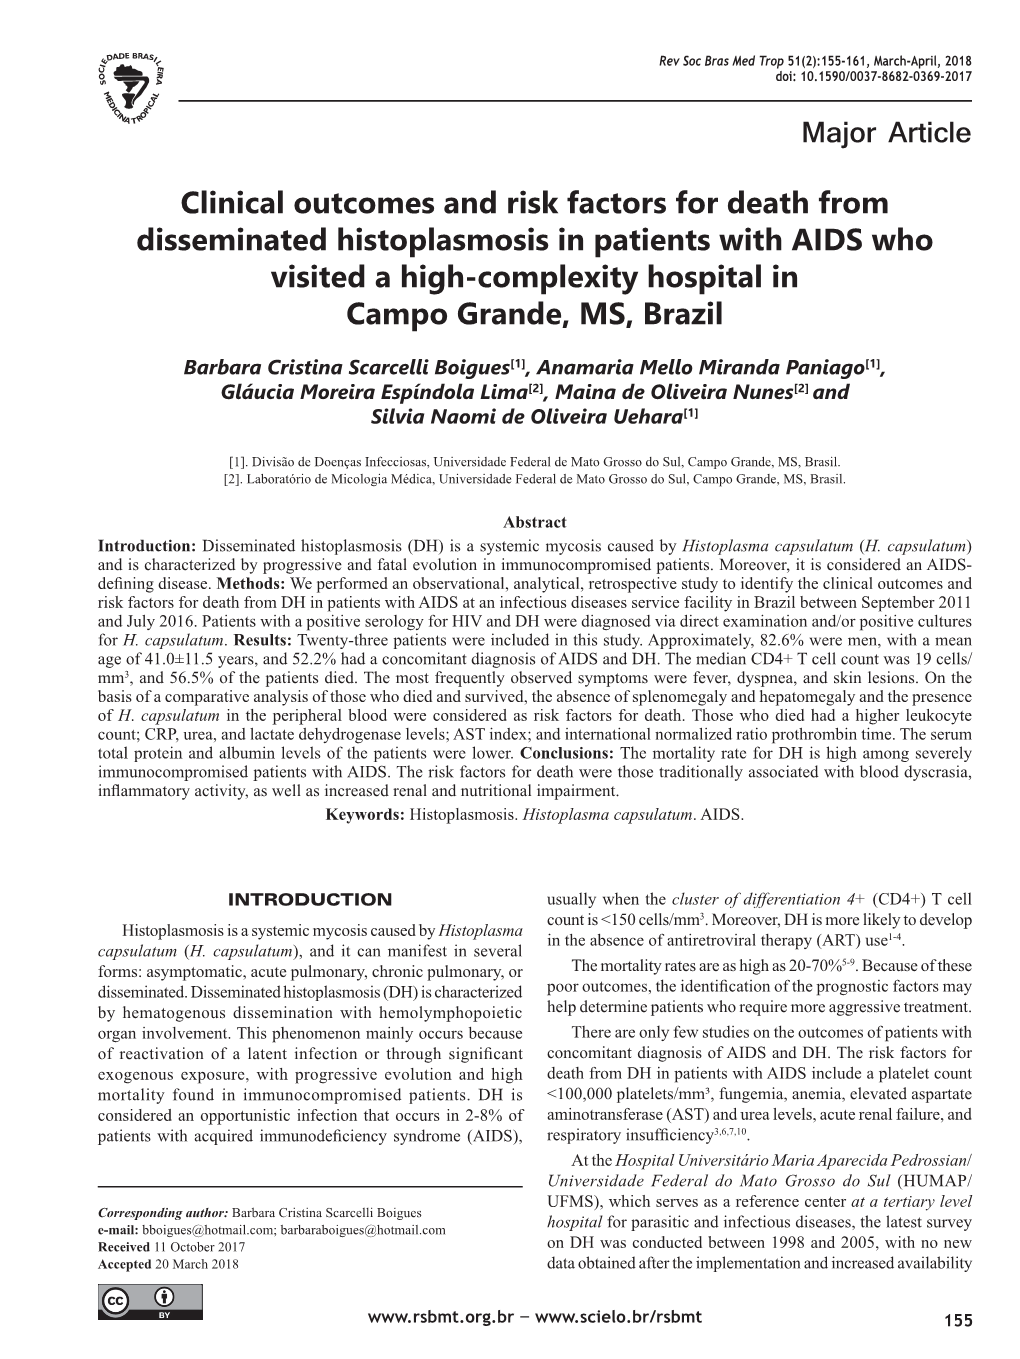 Major Article Clinical Outcomes and Risk Factors for Death From